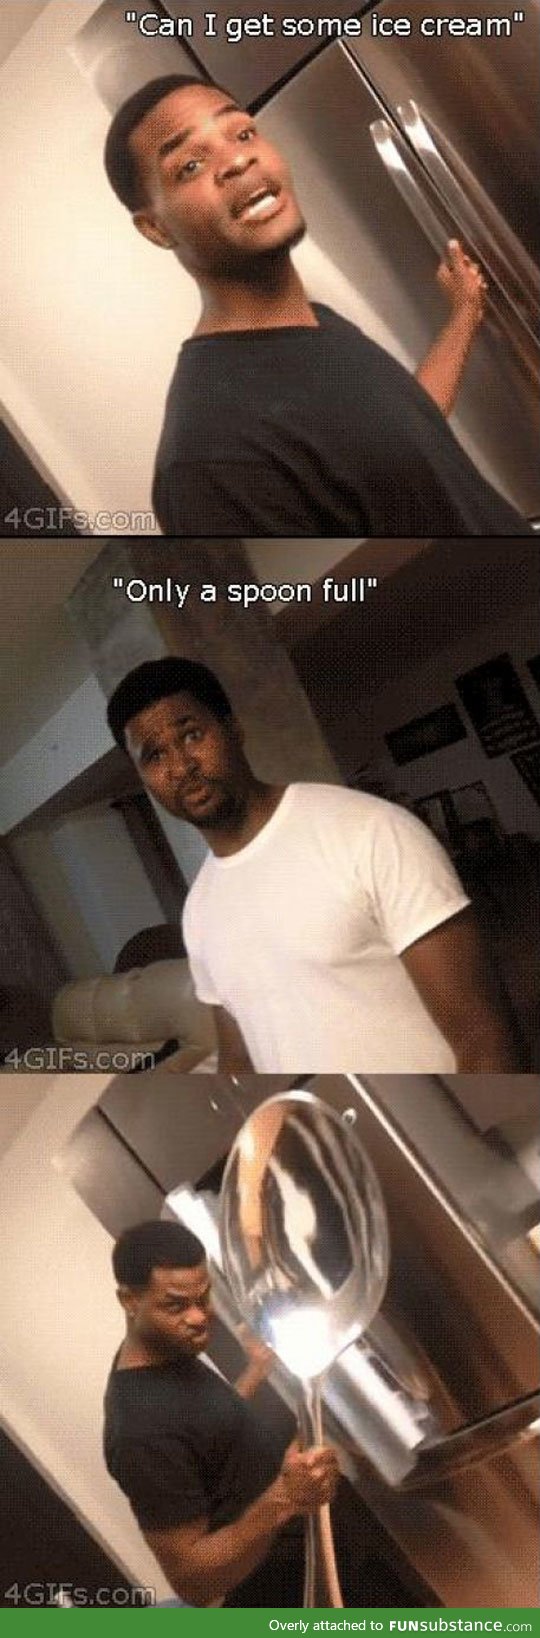 Only a spoon full